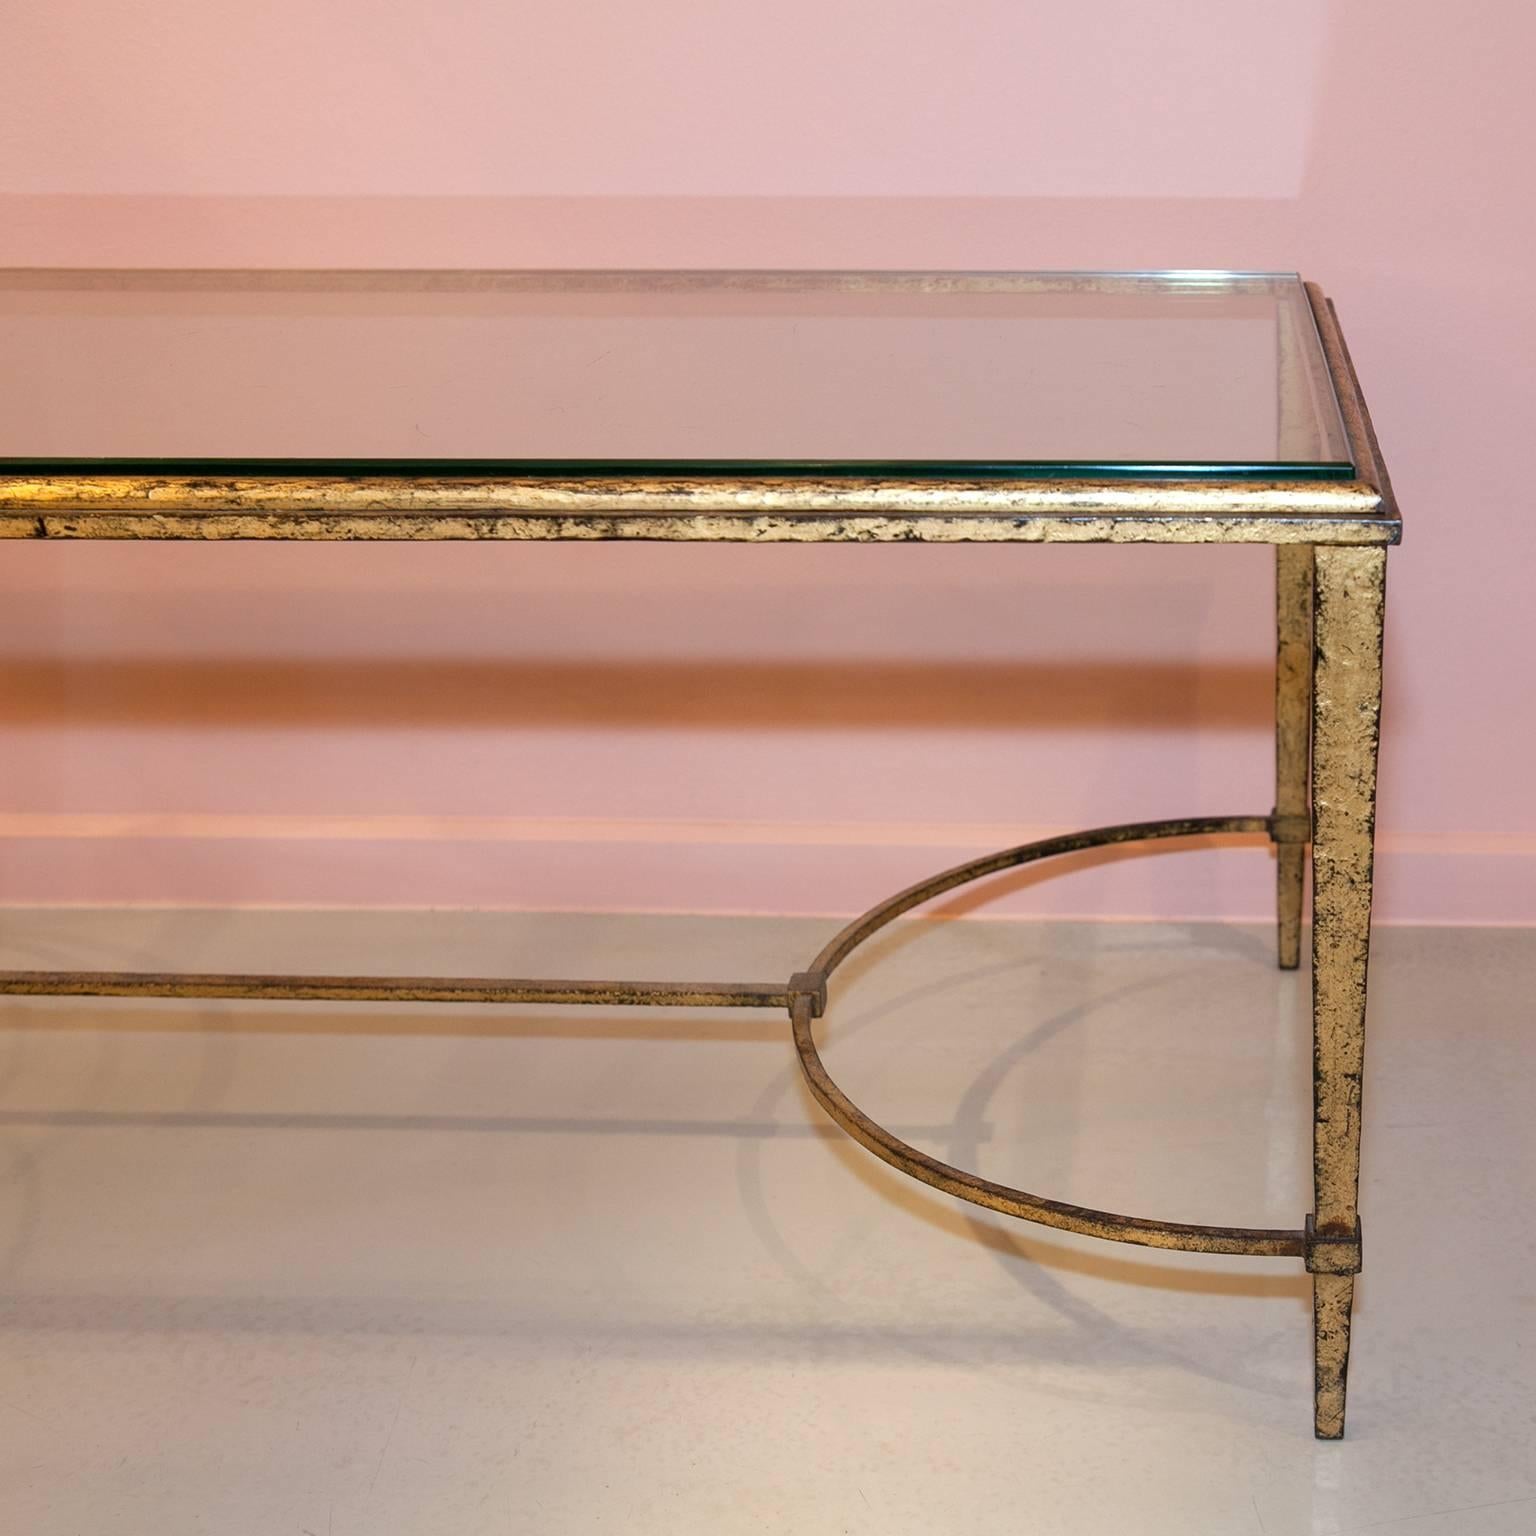 This antique coffee table is both – a truly timeless piece and a fine eye catcher for your place.
The gilded legs have a tapered shape and are connected by a thin stretcher. The glass plate features beveled edges whereby it blends perfectly into the